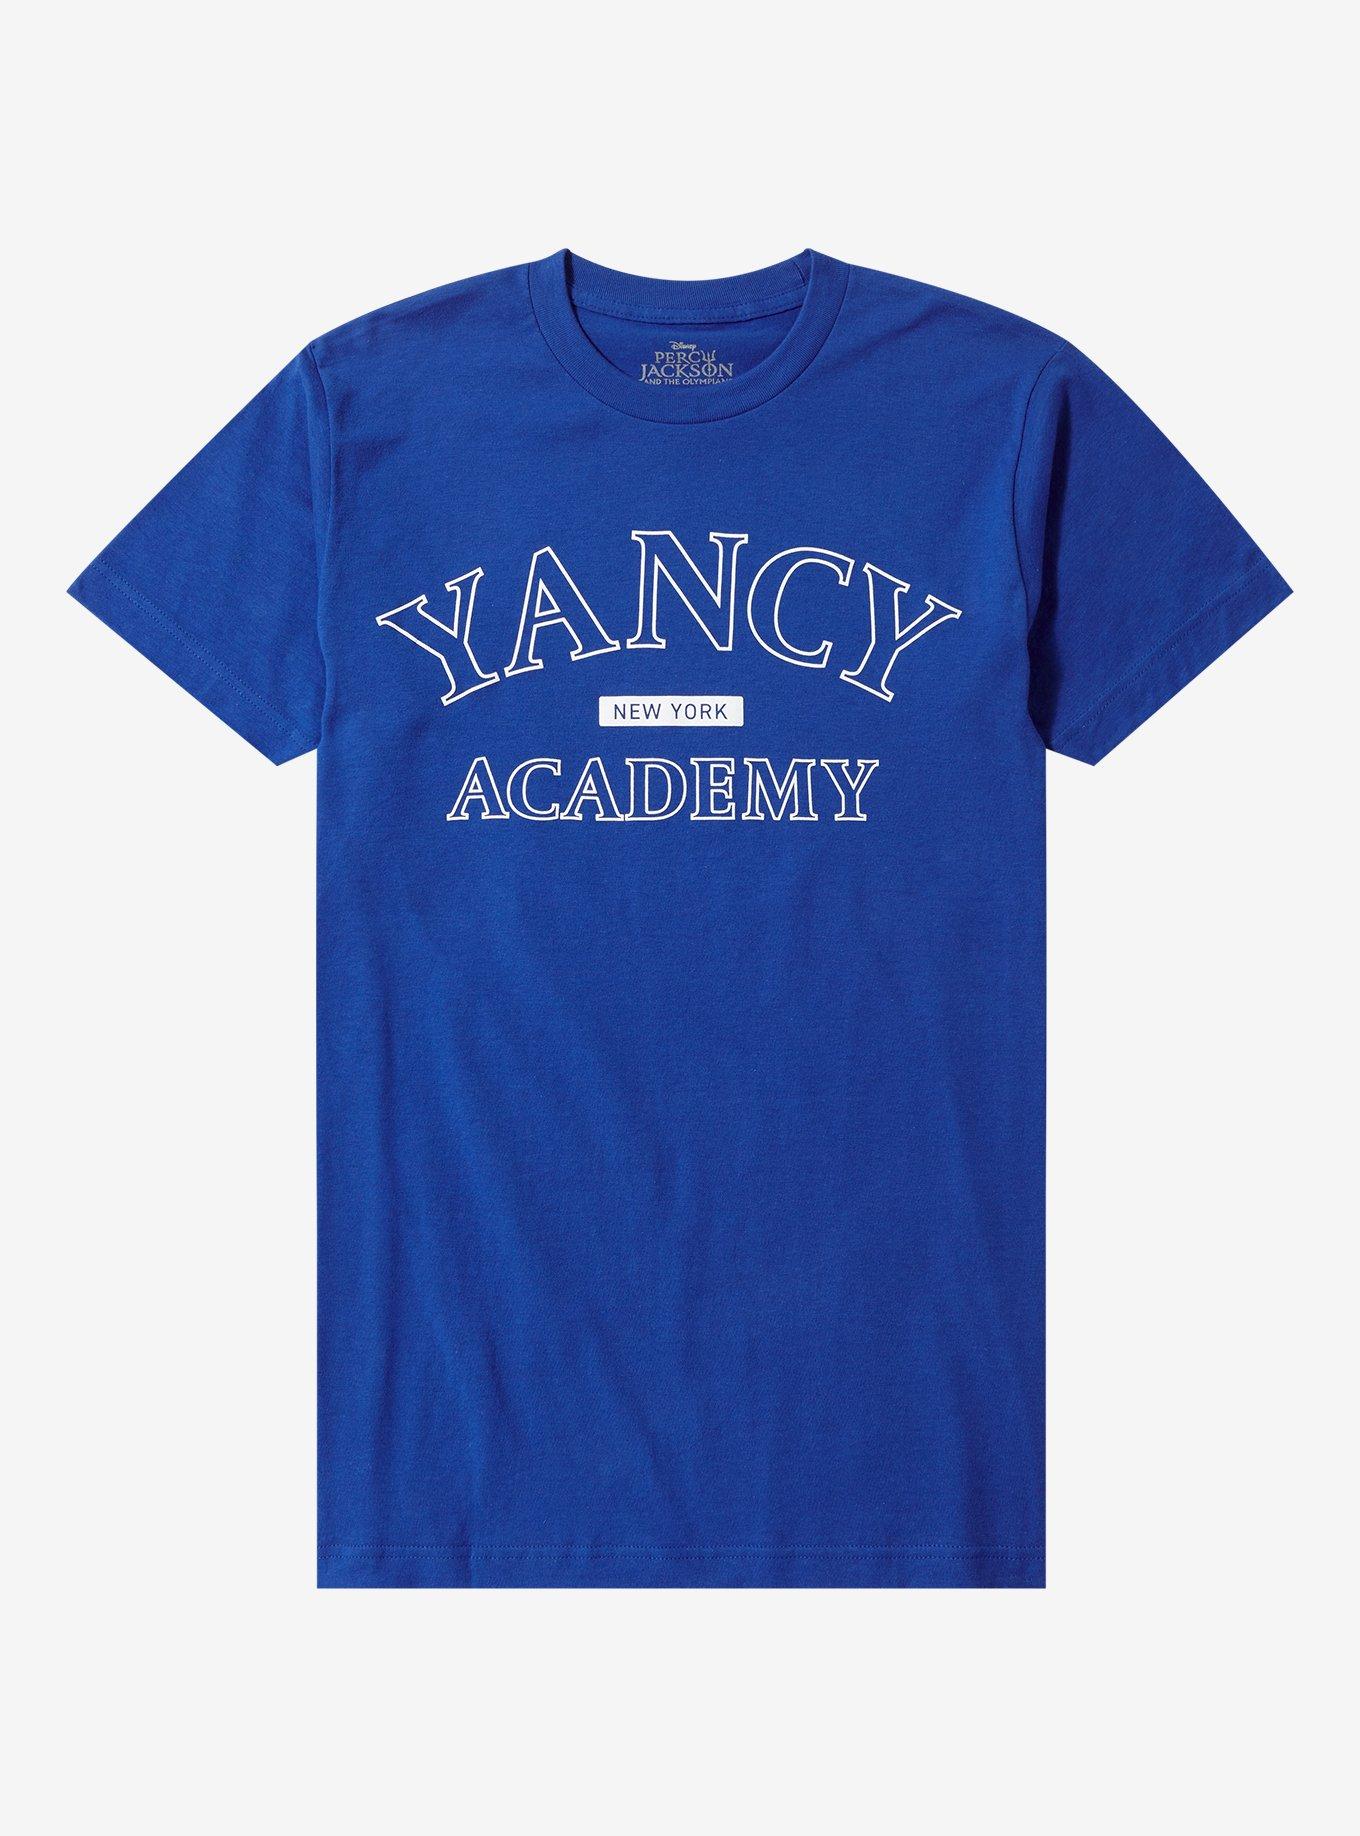 Disney Percy Jackson And The Olympians Yancy Academy T-Shirt | Hot Topic